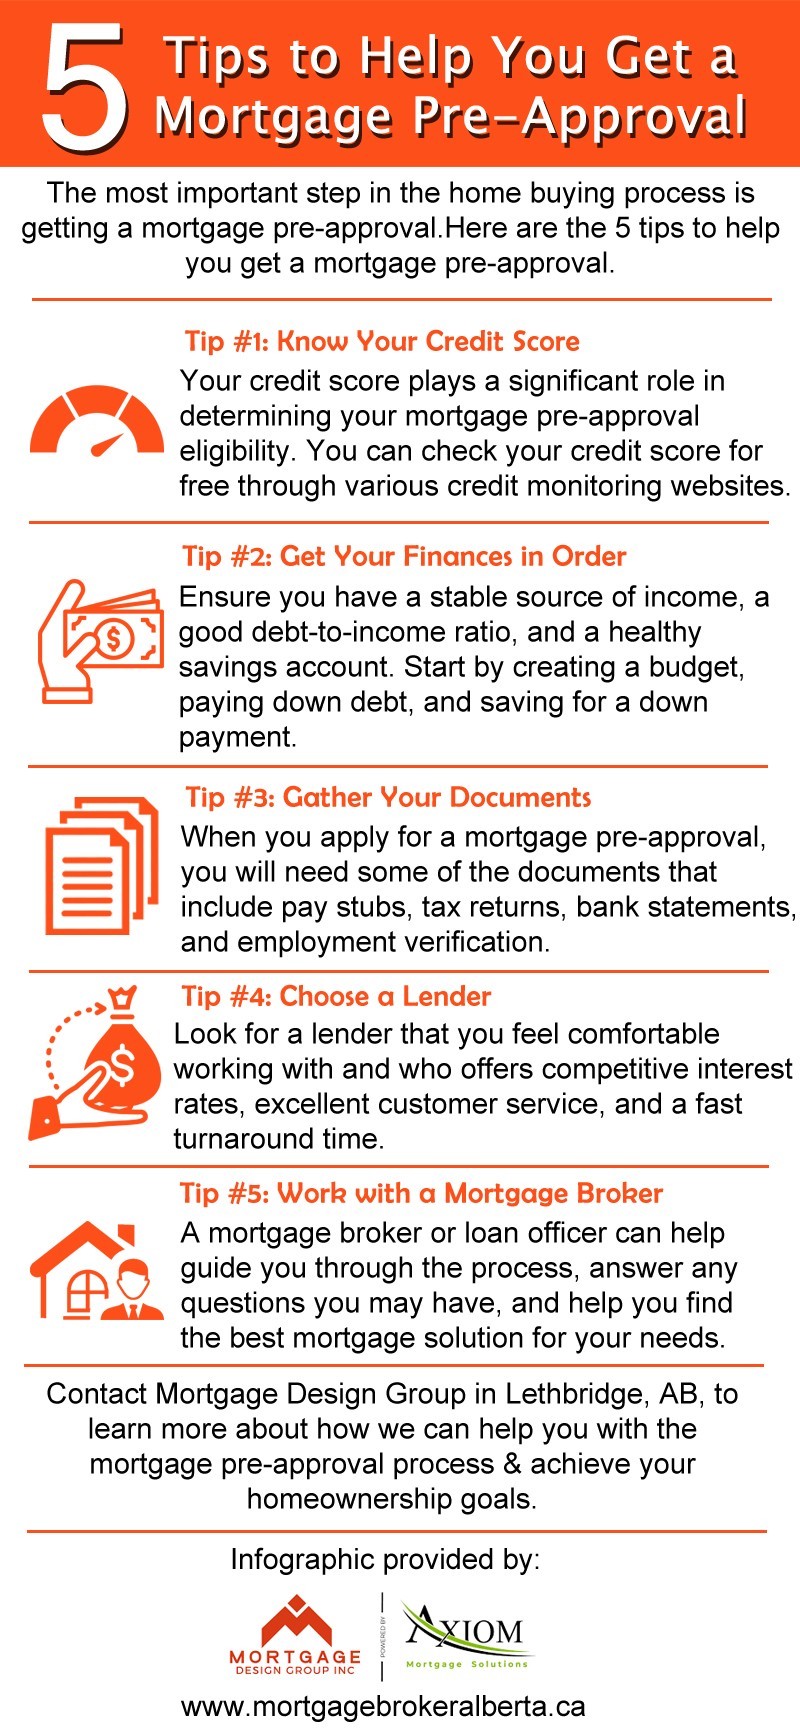 5 Tips to Help You Get a Mortgage Pre-Approval